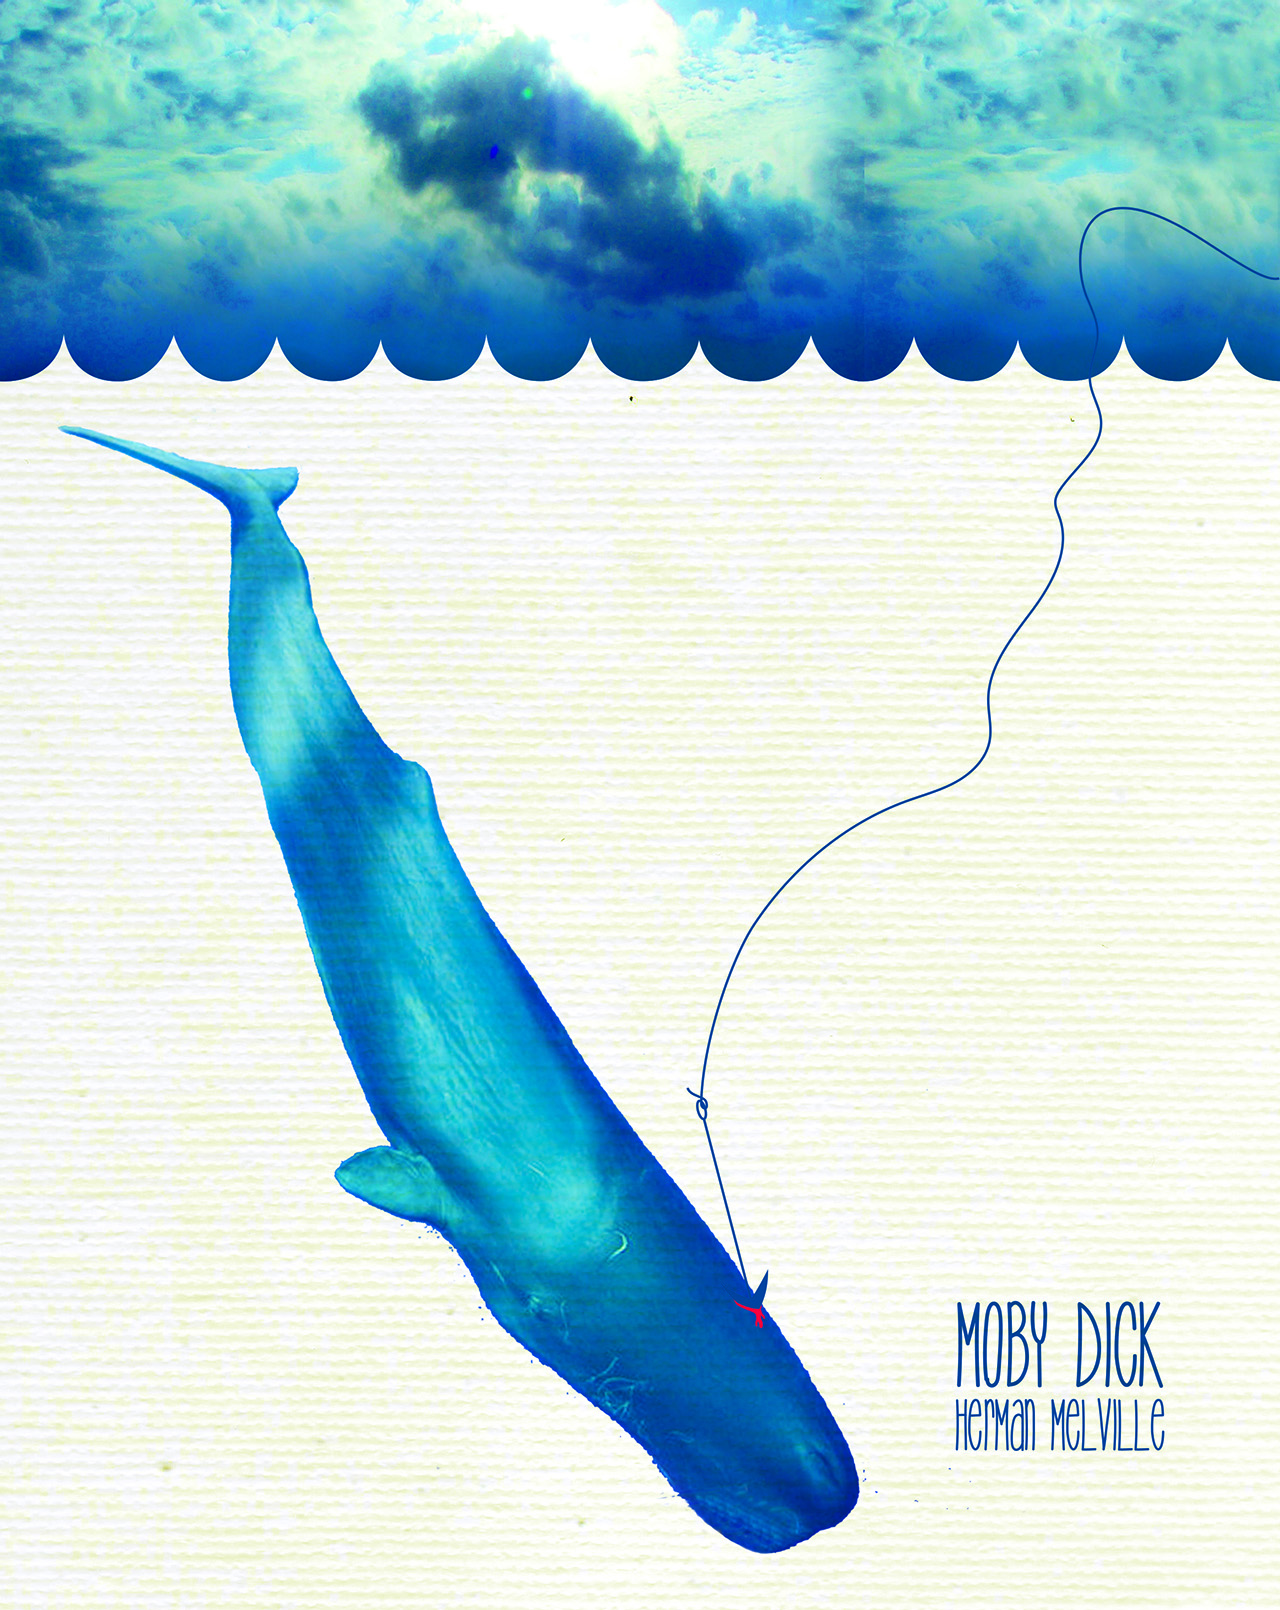 Andrea Taylor | "Moby Dick" by Herman Melville